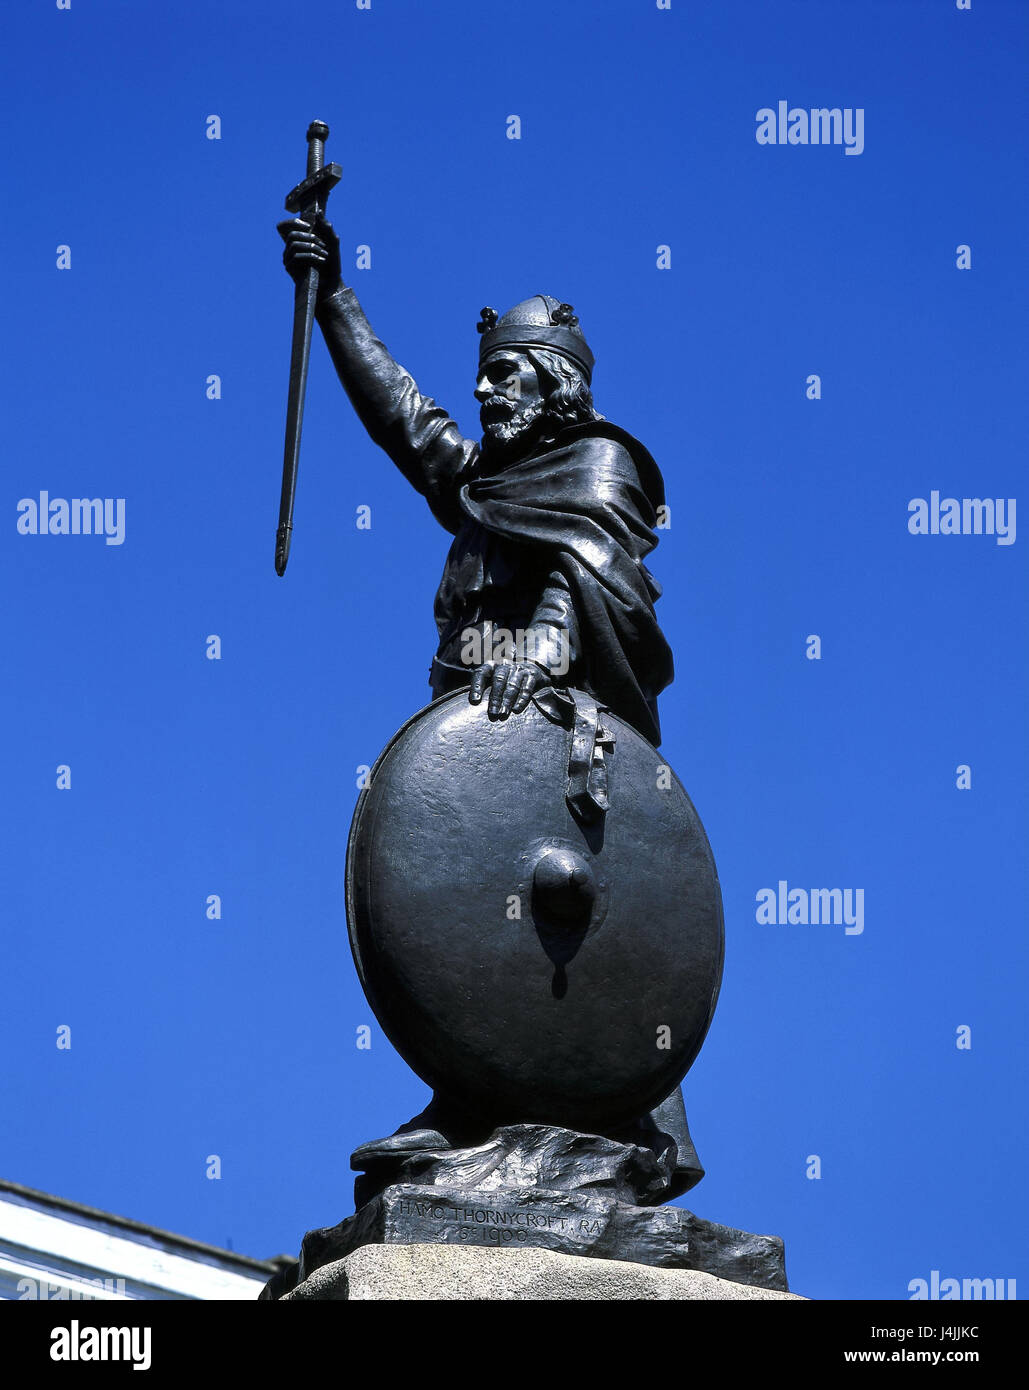 Great Britain, Hampshire, Winchester disk, statue 'Alfred of the tallness' England, bronze statue, freeze frame, king of Anglo-Saxons, culture, place of interest Stock Photo